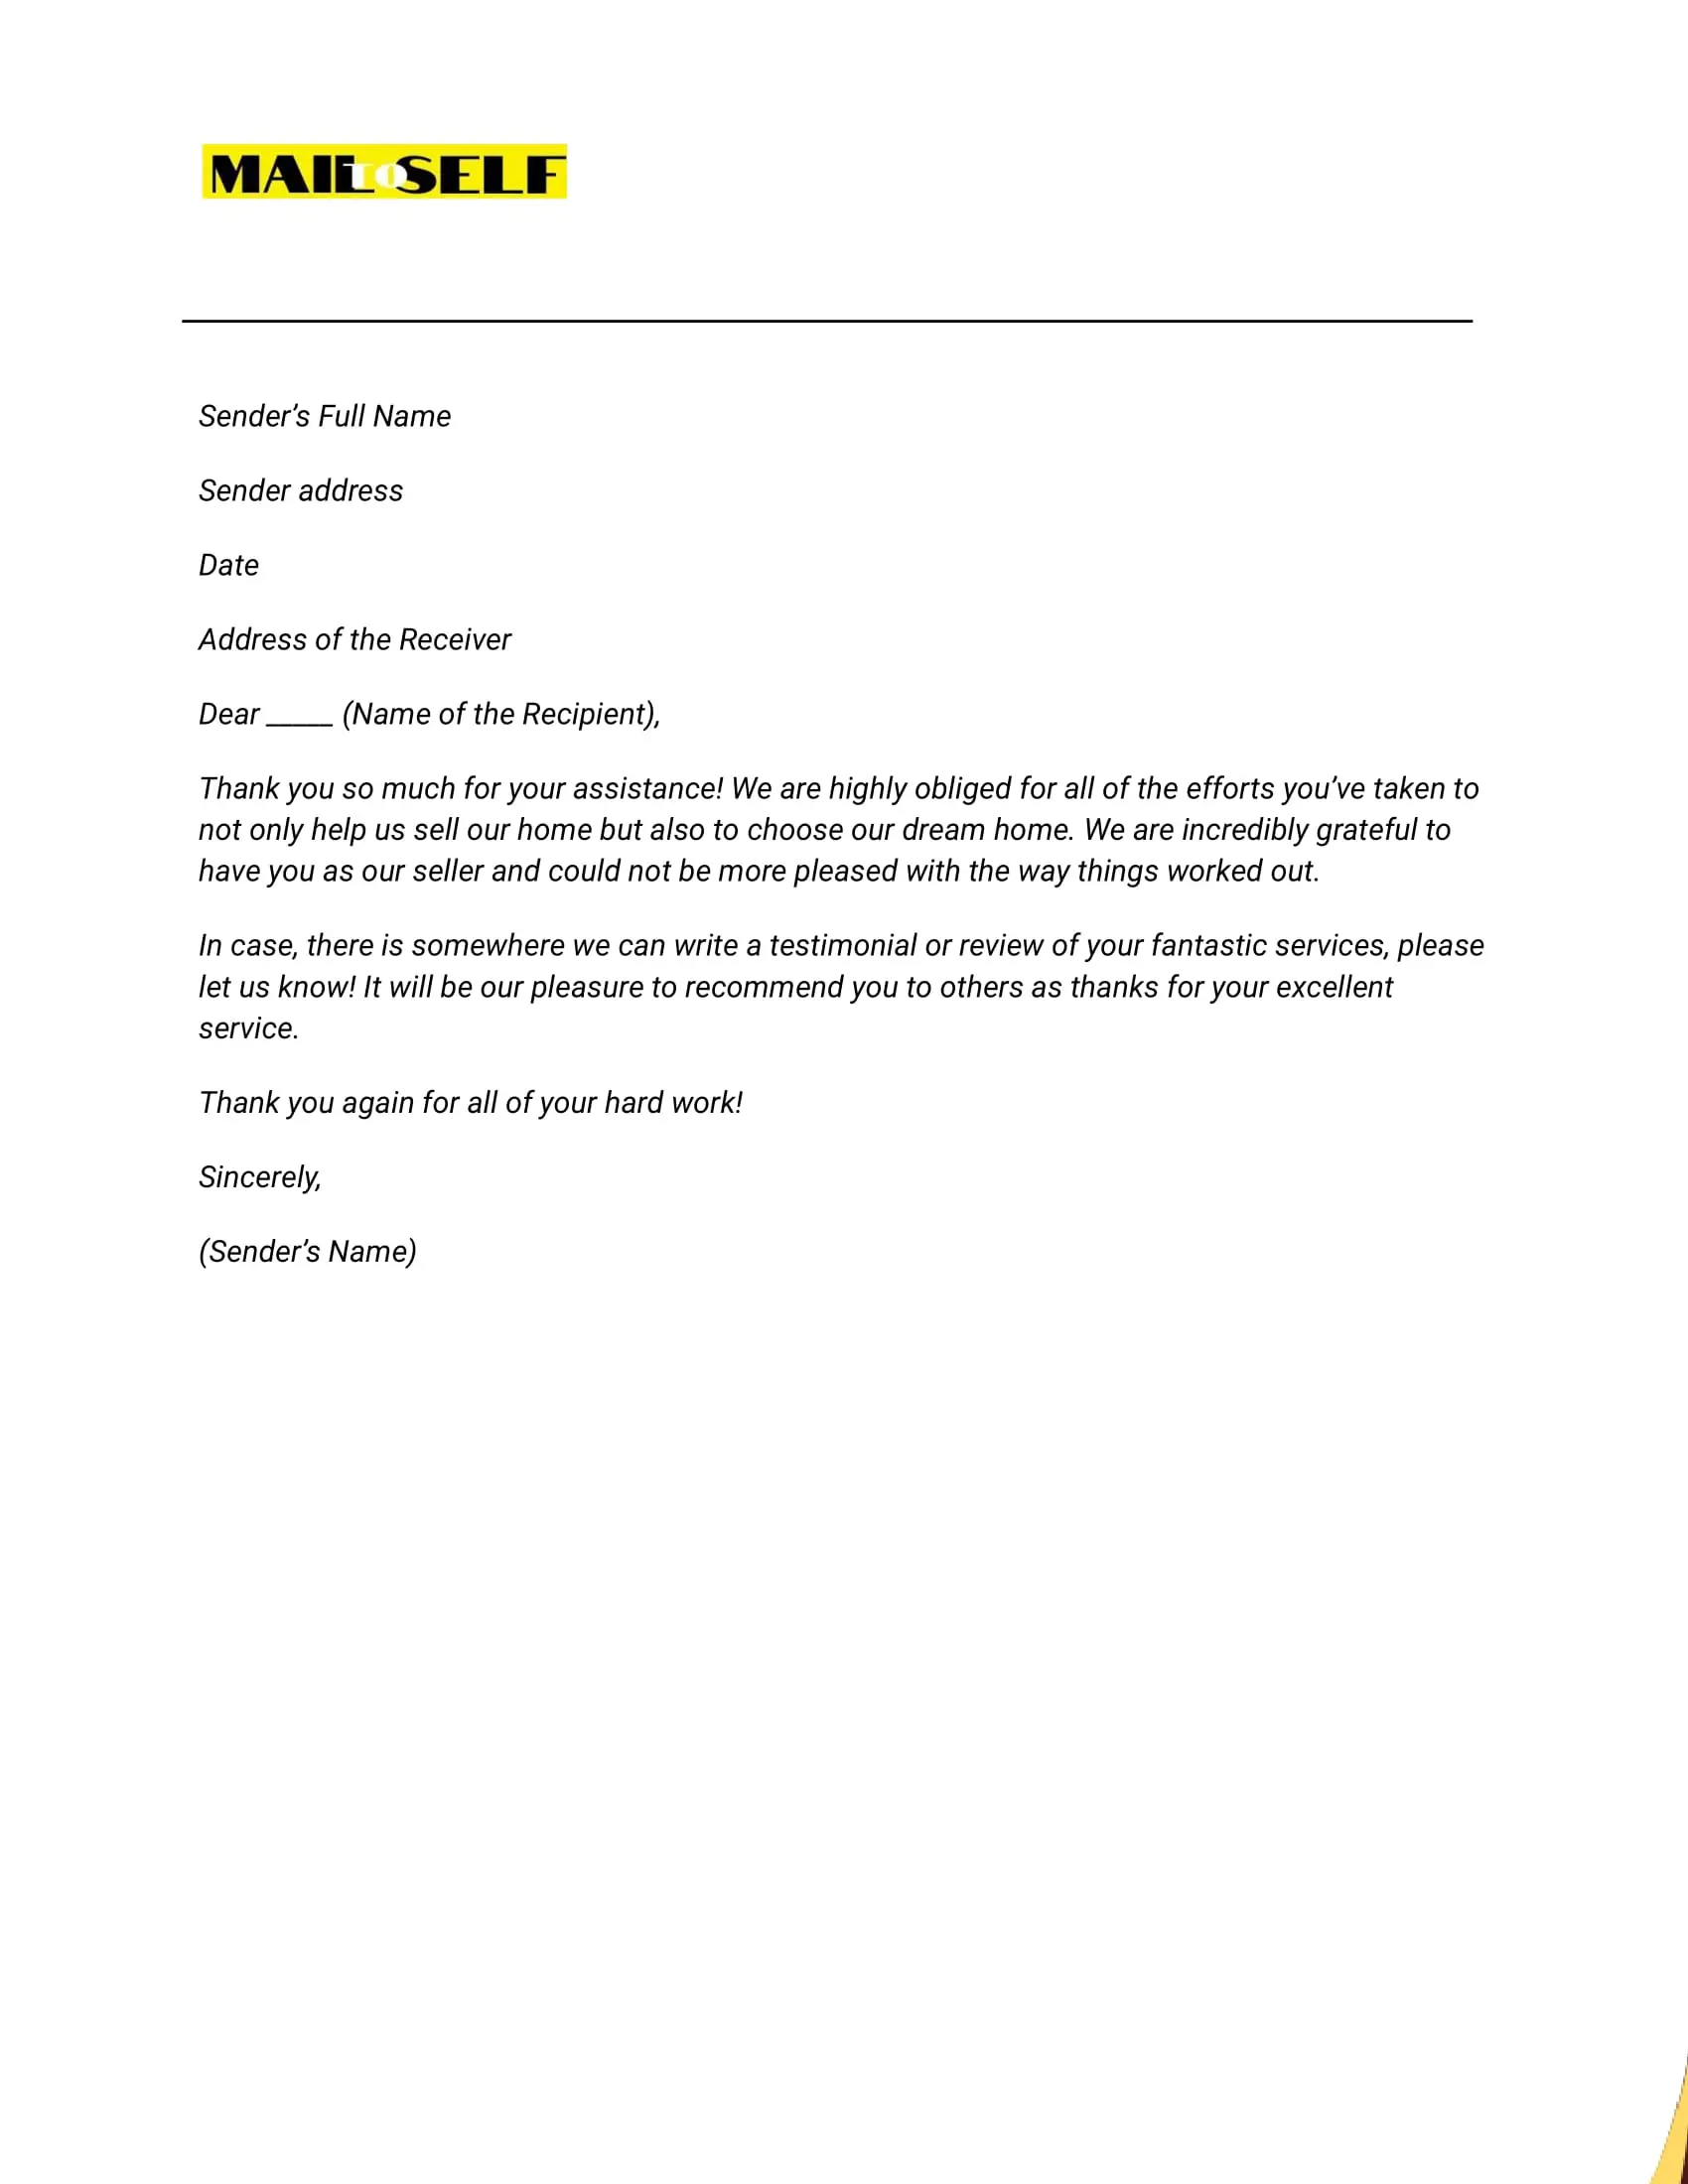 Sample #5 Thank You Letter to Real Estate Agent